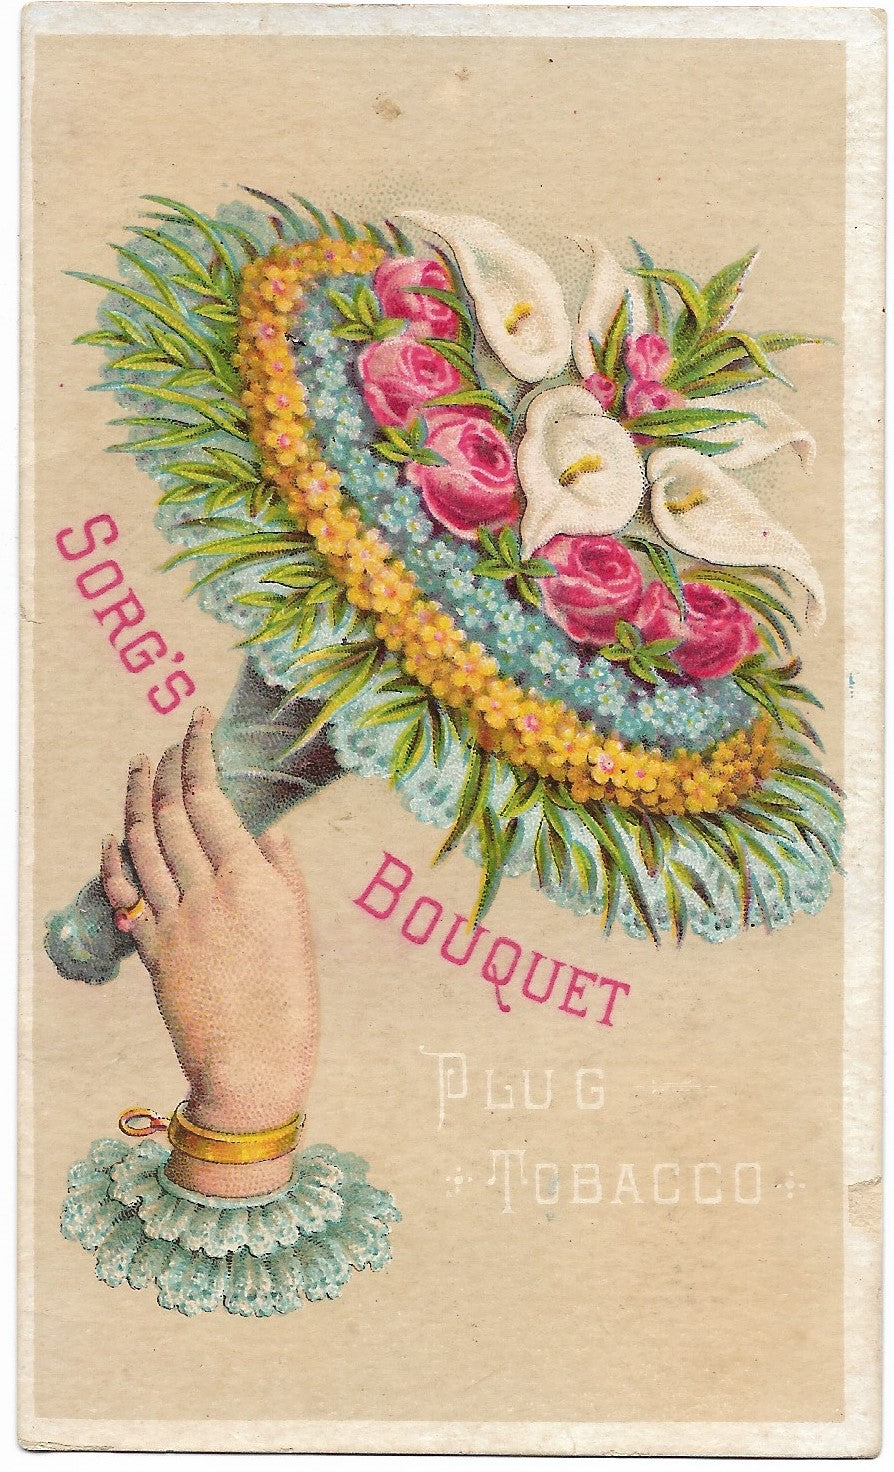 Sorg's Bouquet Plug Tobacco Antique Trade Card, Middletown, OH - 3" x 4.75"